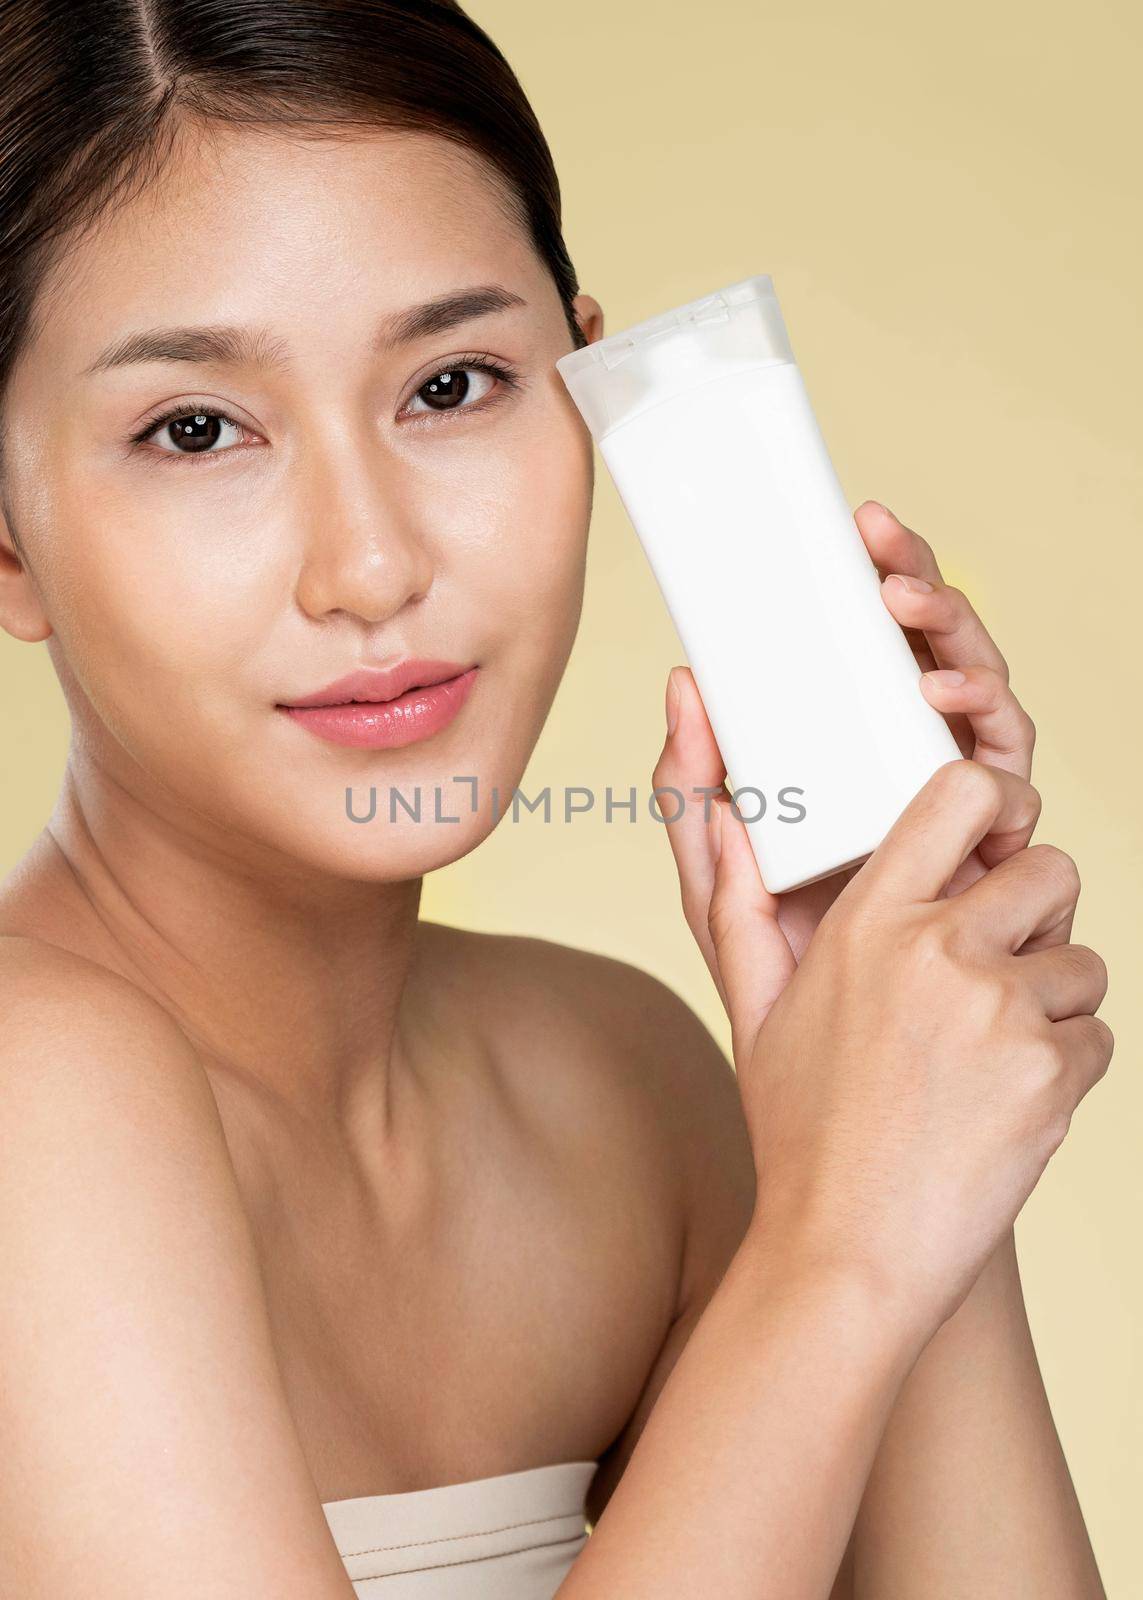 Closeup ardent woman smiling holding mockup product for advertising text place, light grey background. Concept of healthcare for skin, beauty care product for advertising.